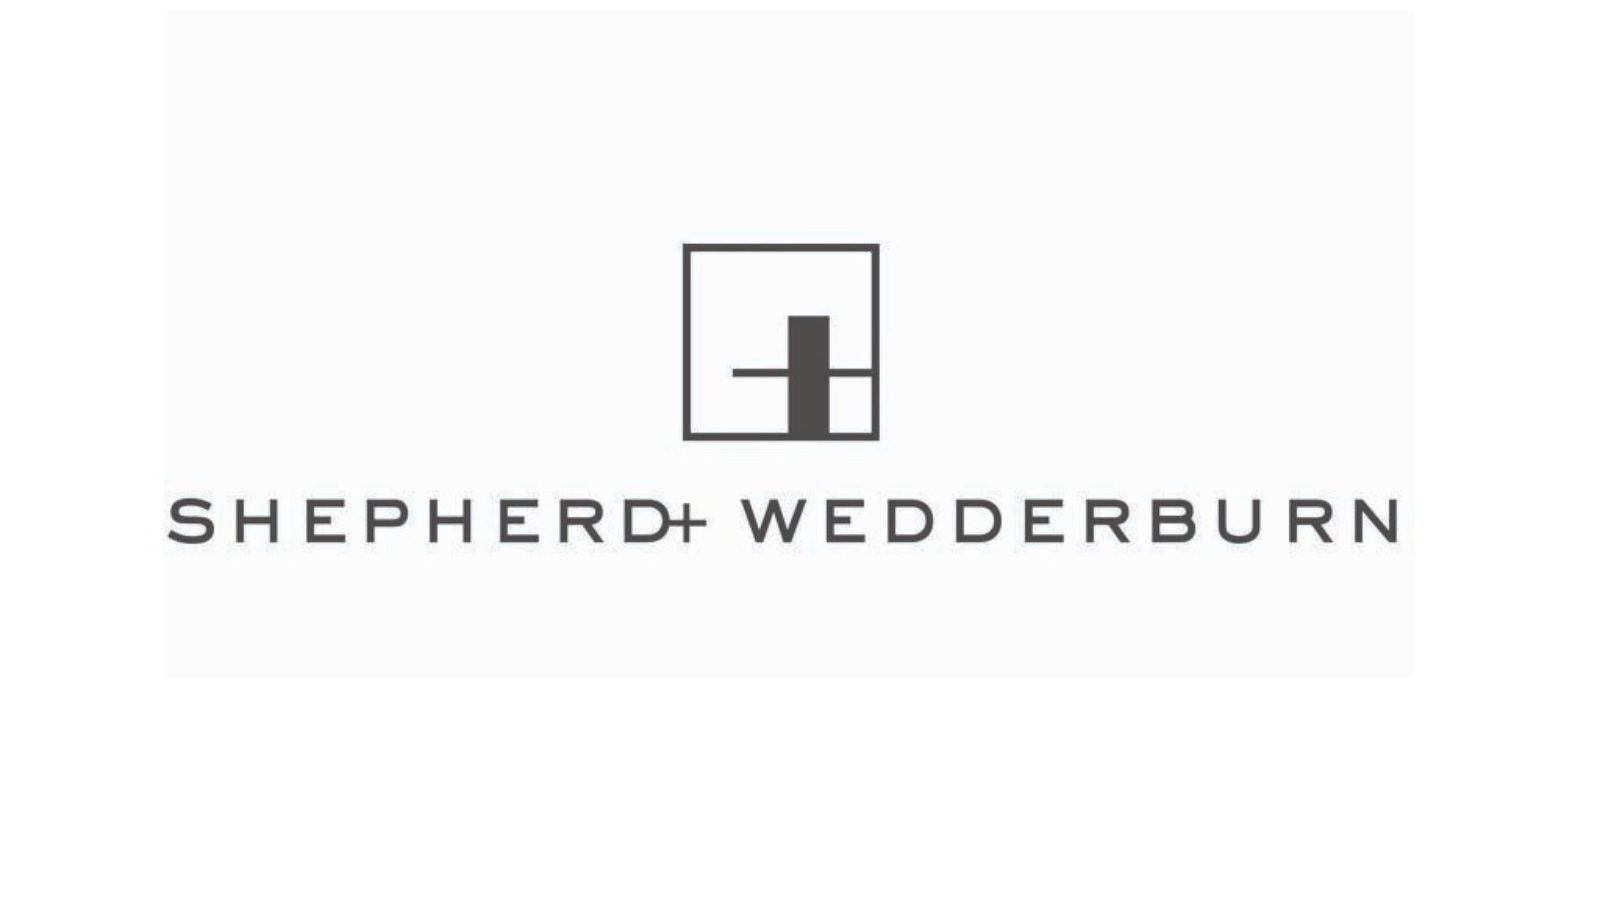 Shepherd and Wedderburn's Aberdeen private wealth and tax practice earns band 2 ranking